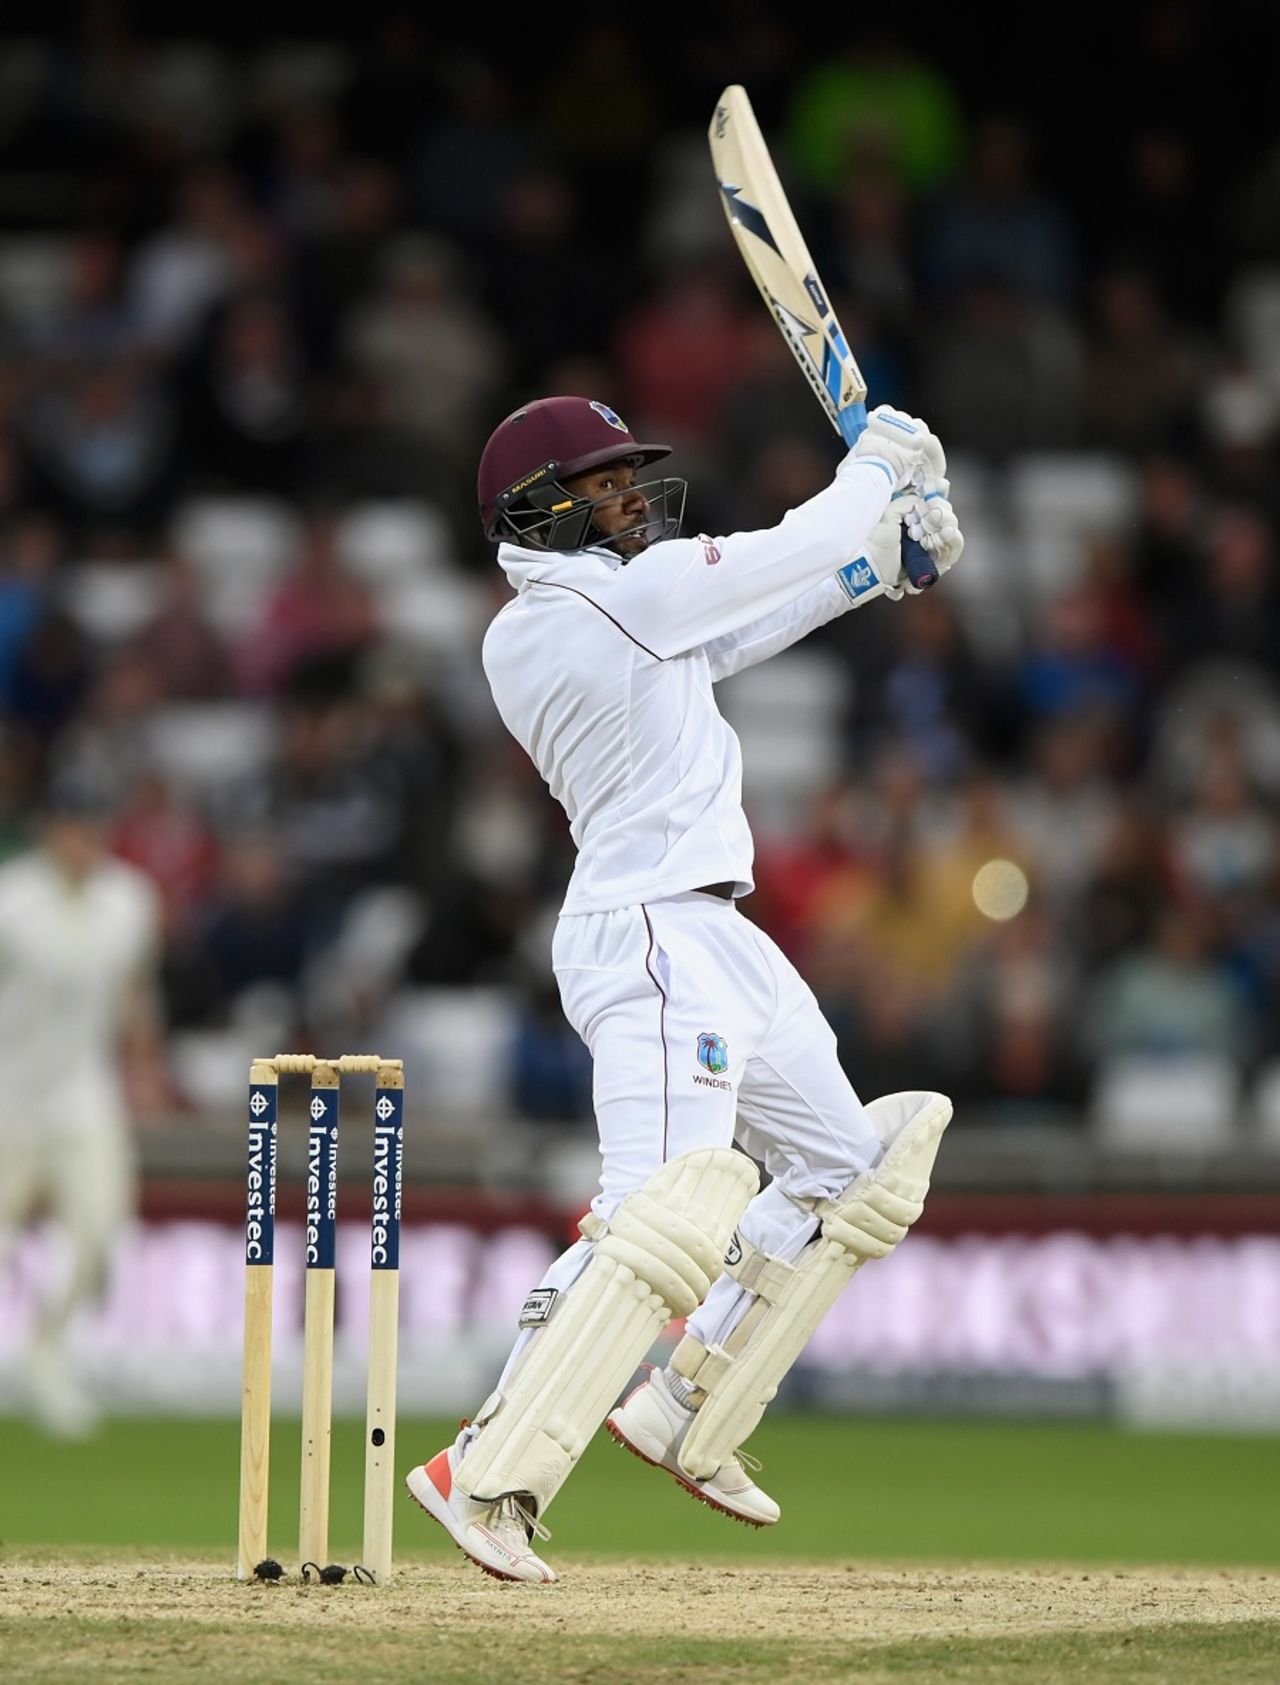 Jermaine Blackwood lays into a pull shot, England v West Indies, 2nd Investec Test, Headingley, 5th day, August 29, 2017